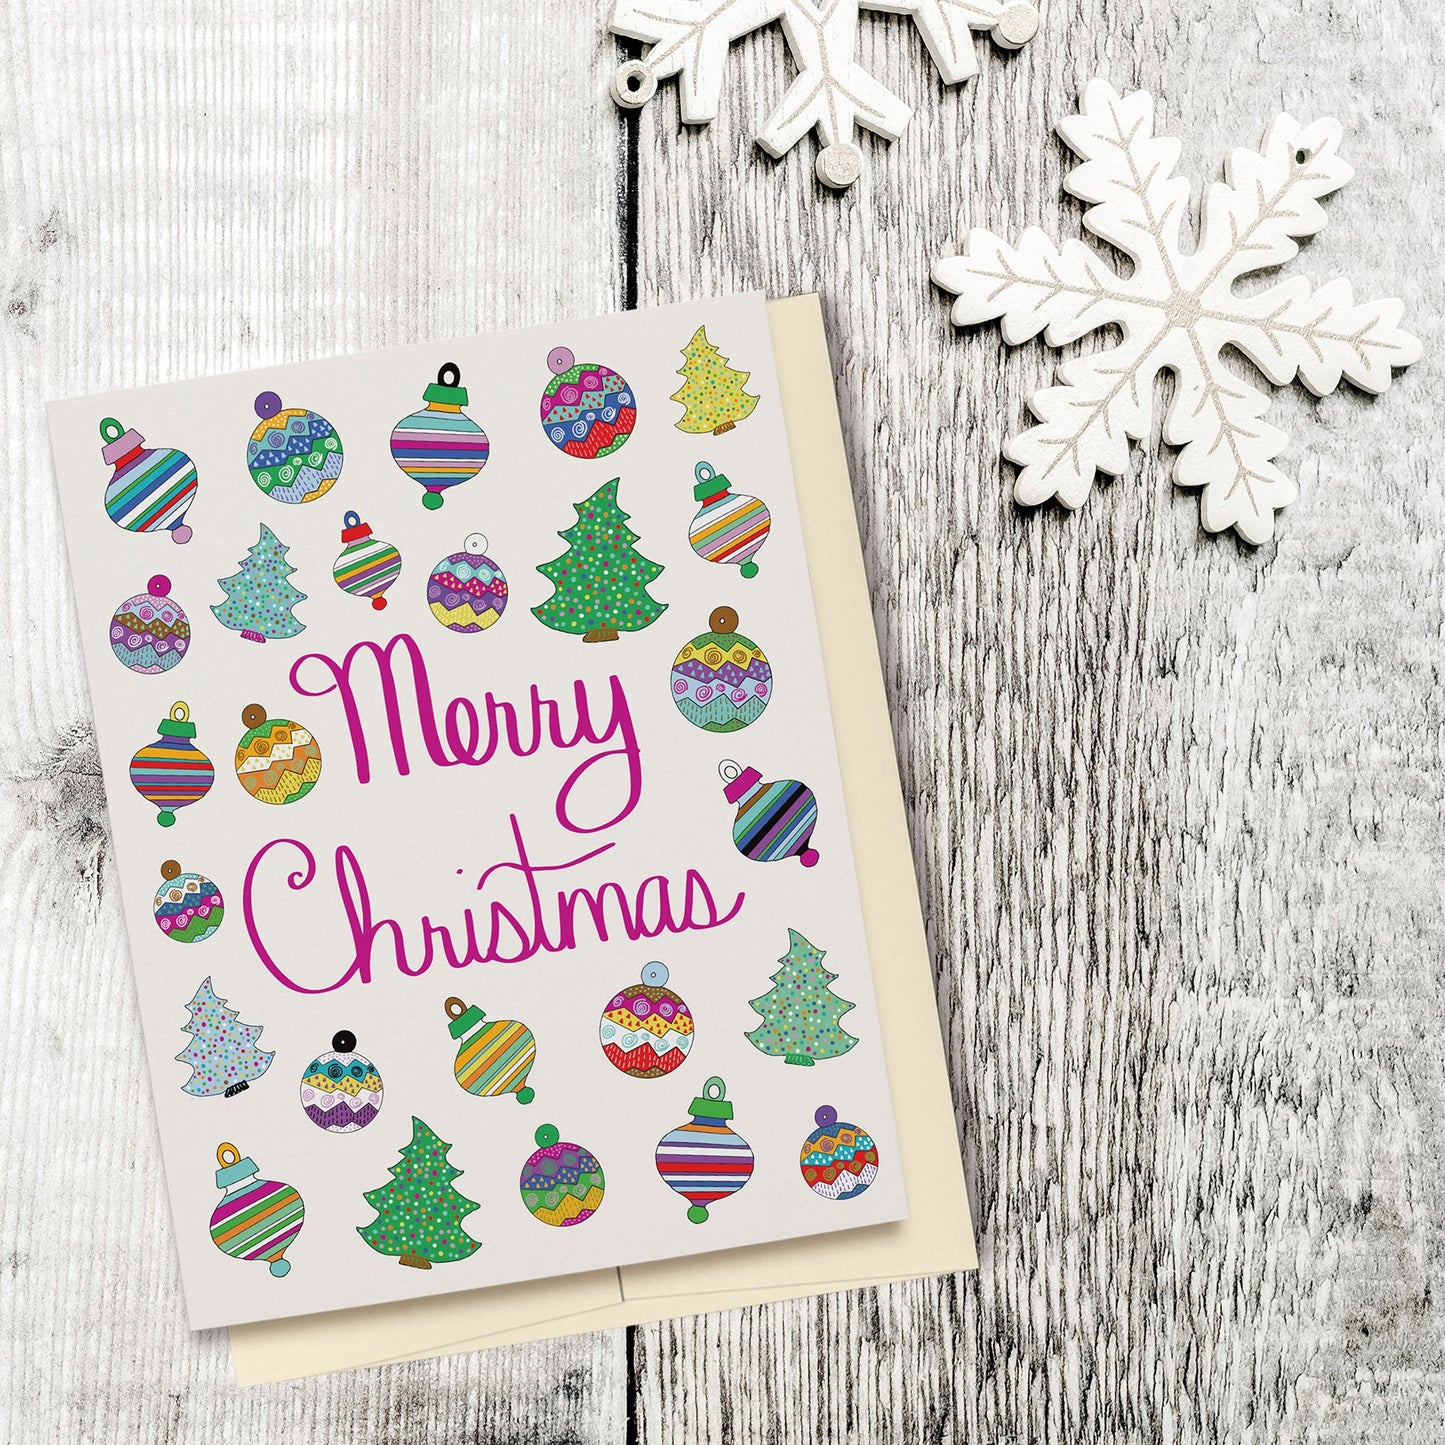 Fun & Festive Merry Christmas Card featuring hand drawn colorful ornaments & Christmas trees with fuchsia-colored hand lettered "Merry Christmas" script. Displayed on a wood background with wooden snowflake ornaments.